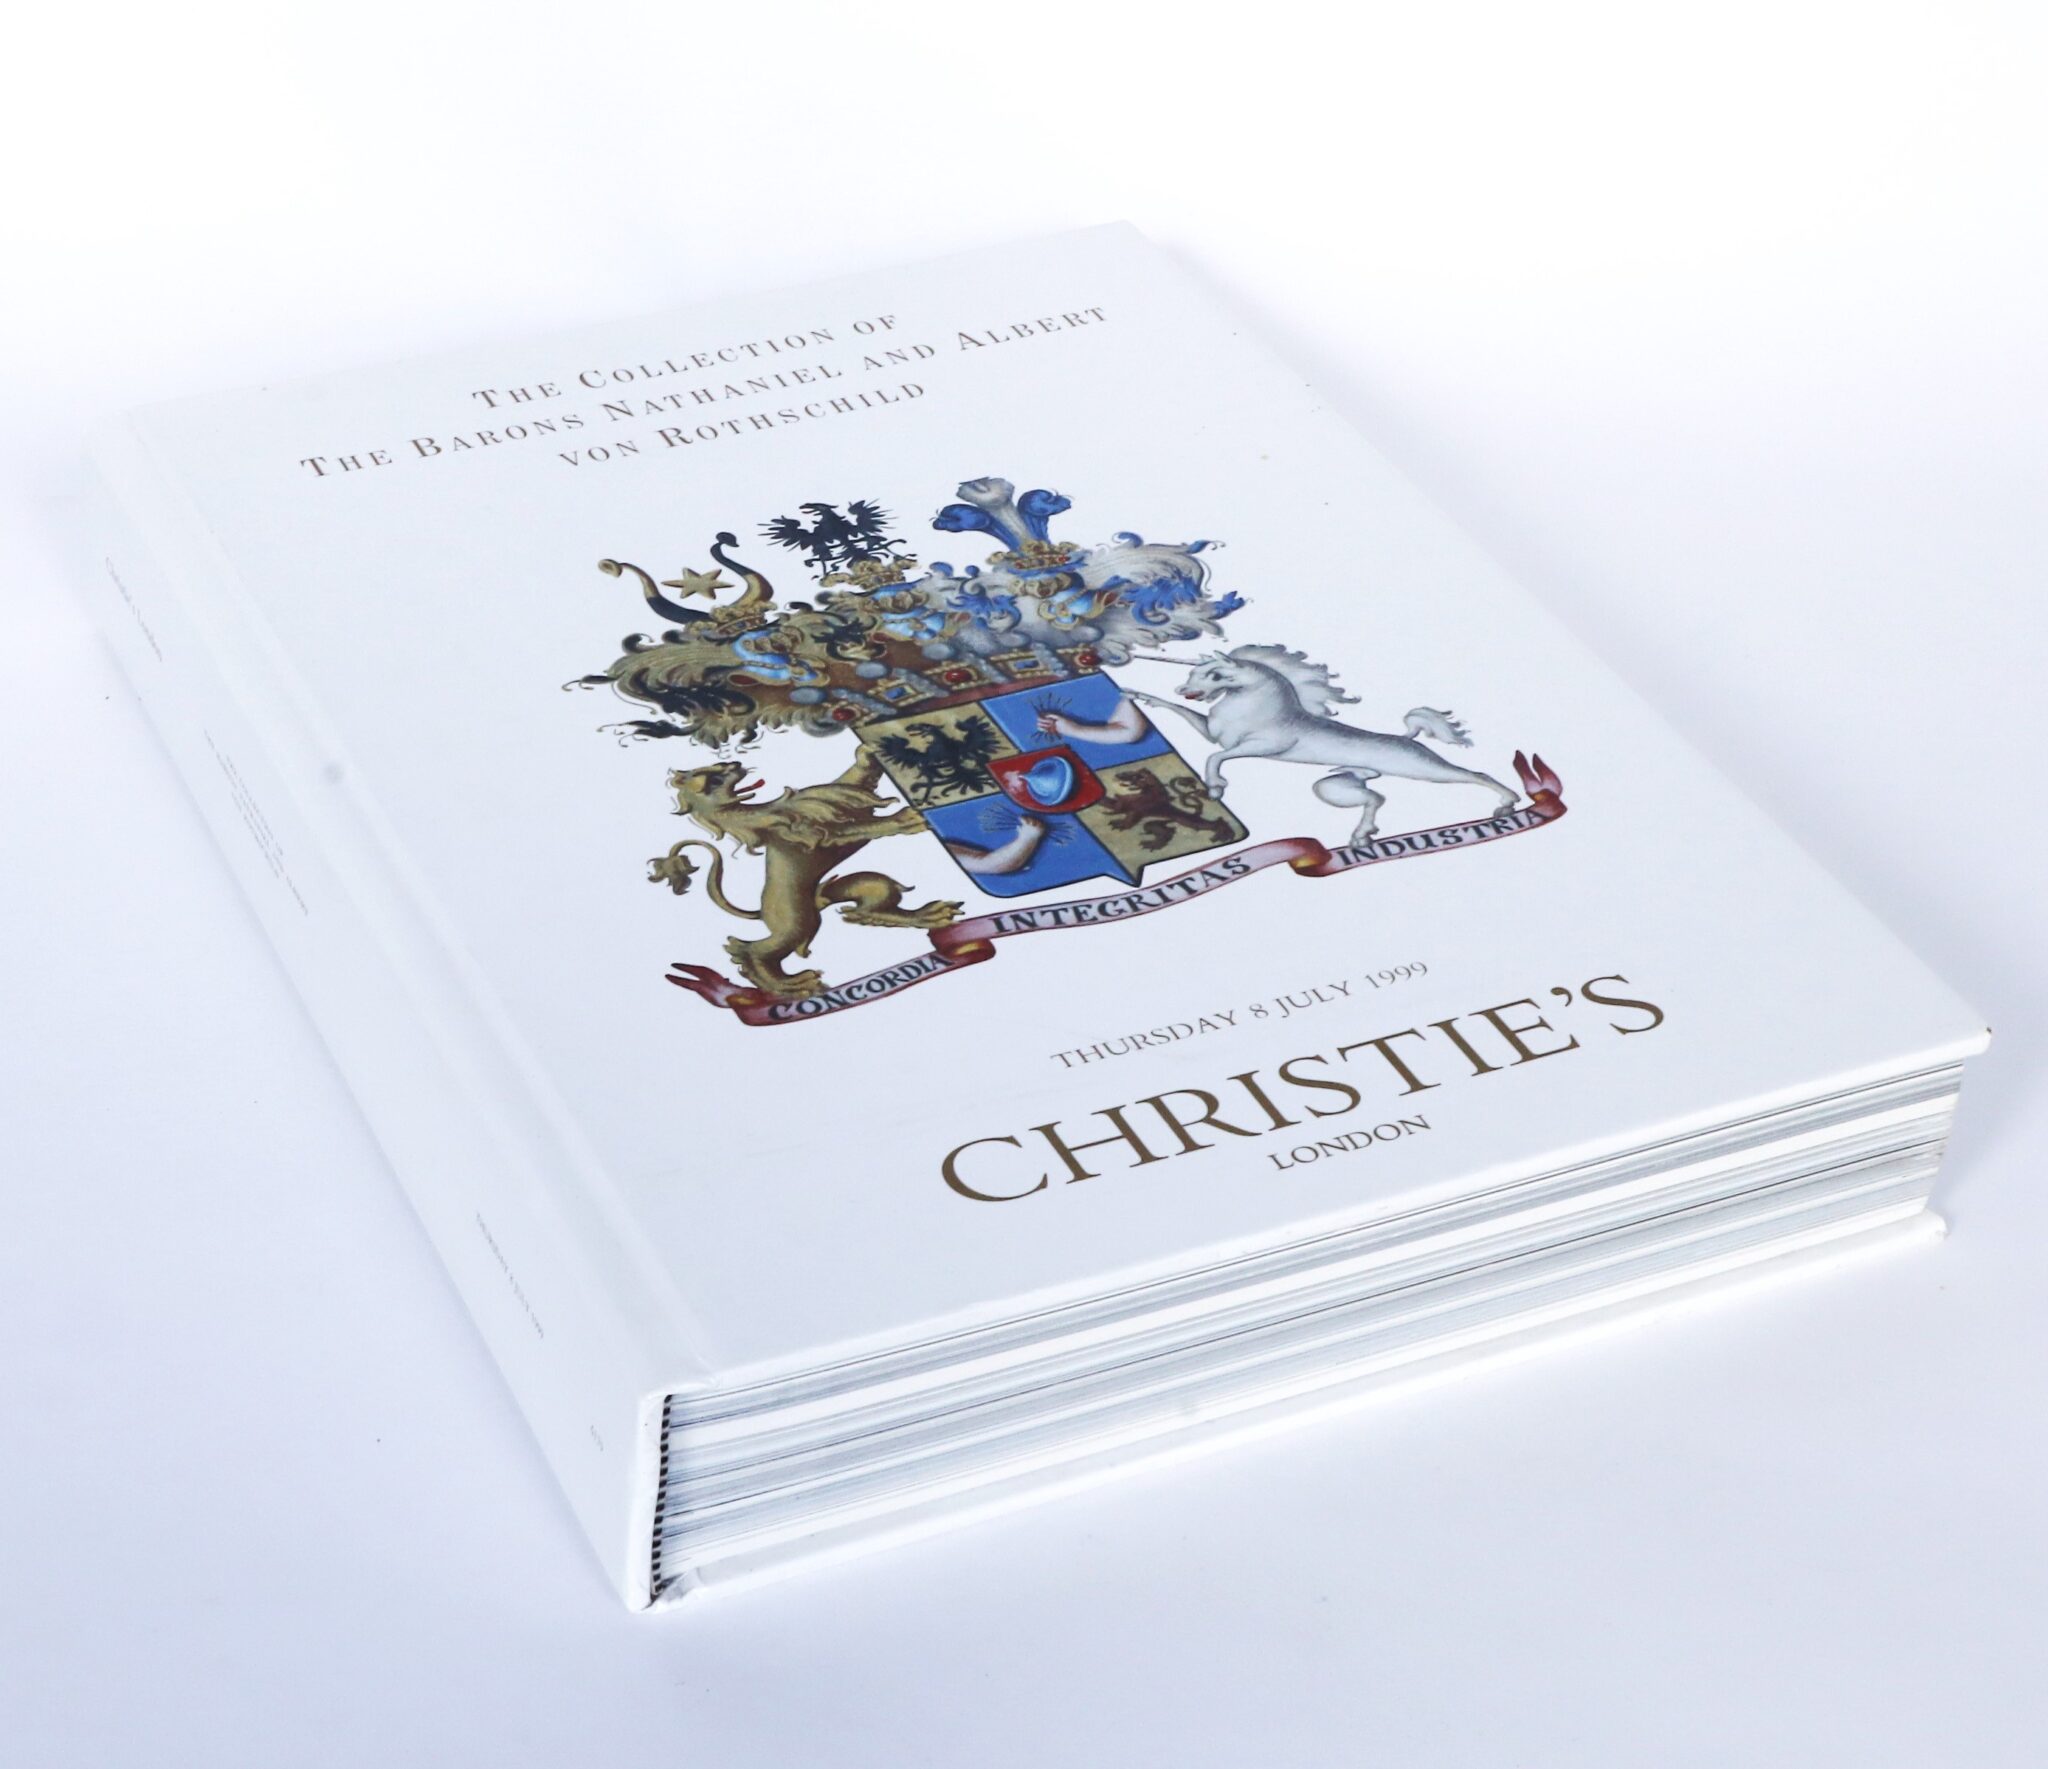 SOLD Christies Catalogue 1999, Rothschild Collection of Scientific Instruments